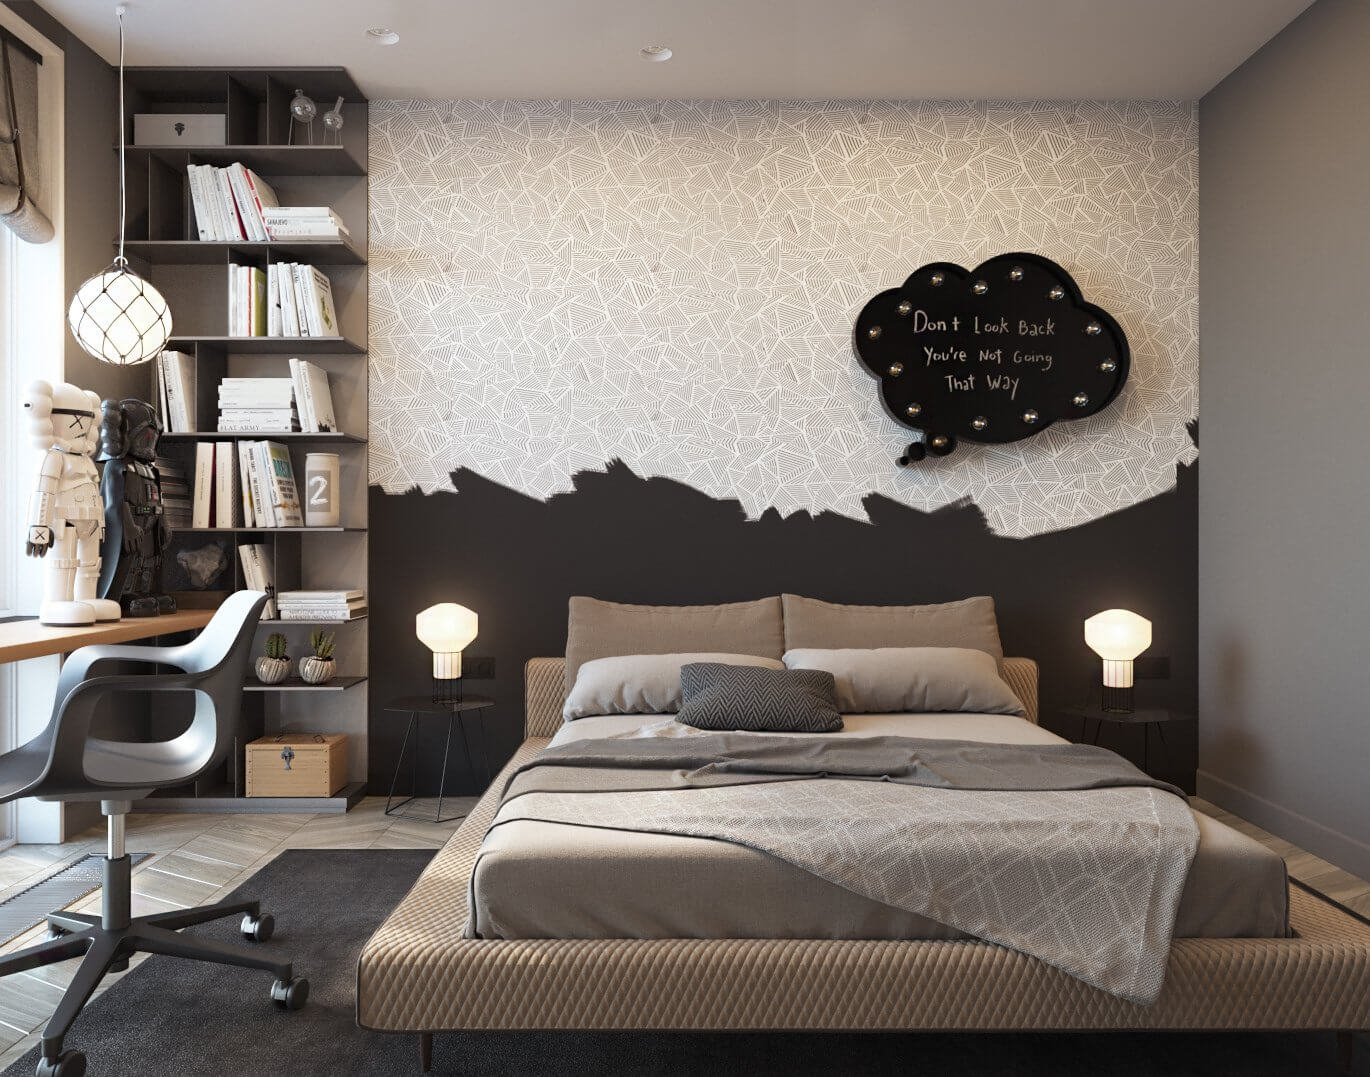 Apartment for a young family kids room - cgi visualization